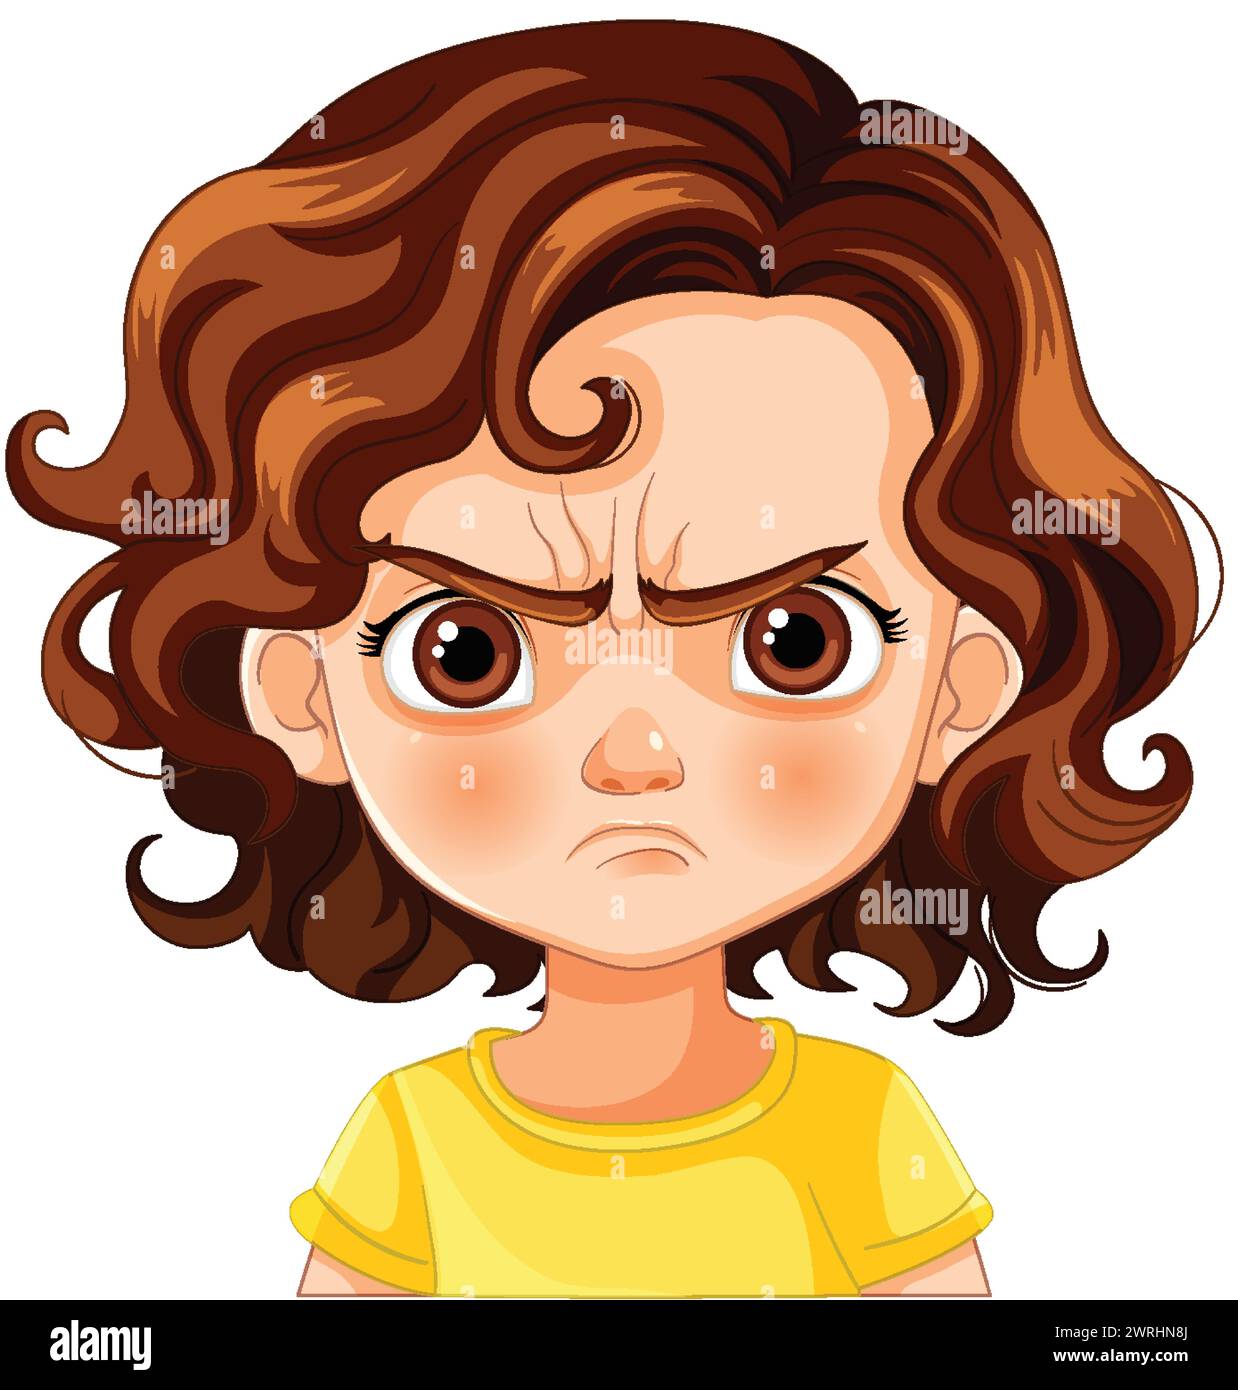 Cartoon of a young girl frowning with displeasure Stock Vector